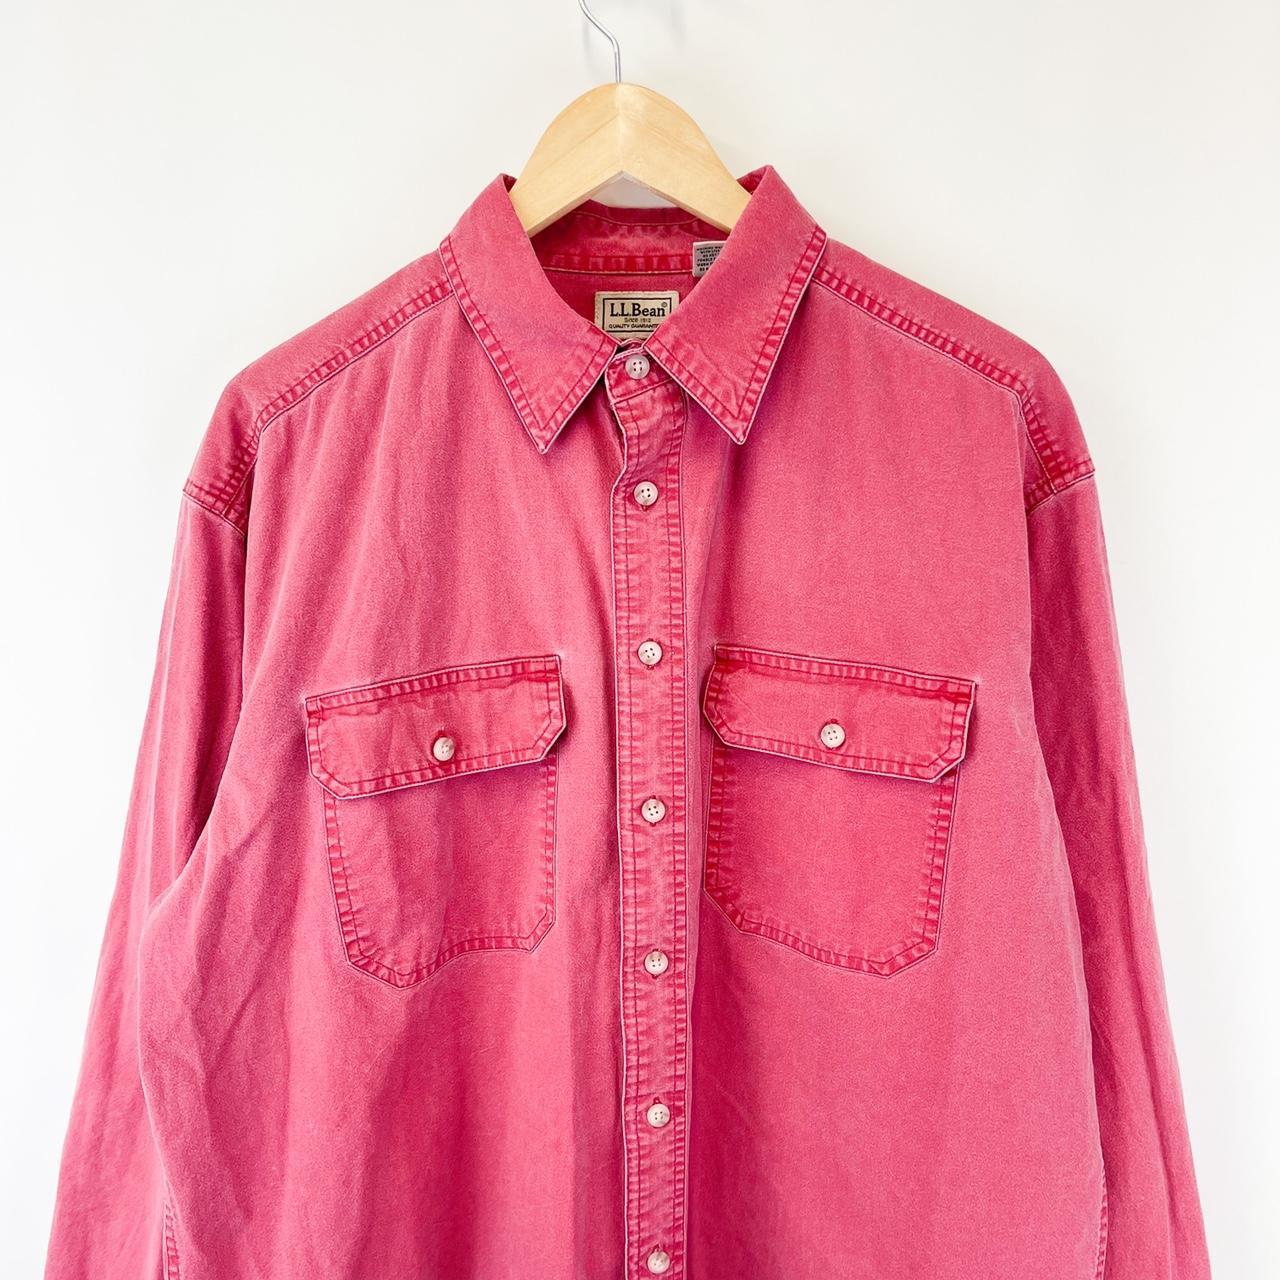 L.L.Bean Men's Red and Pink Shirt (2)